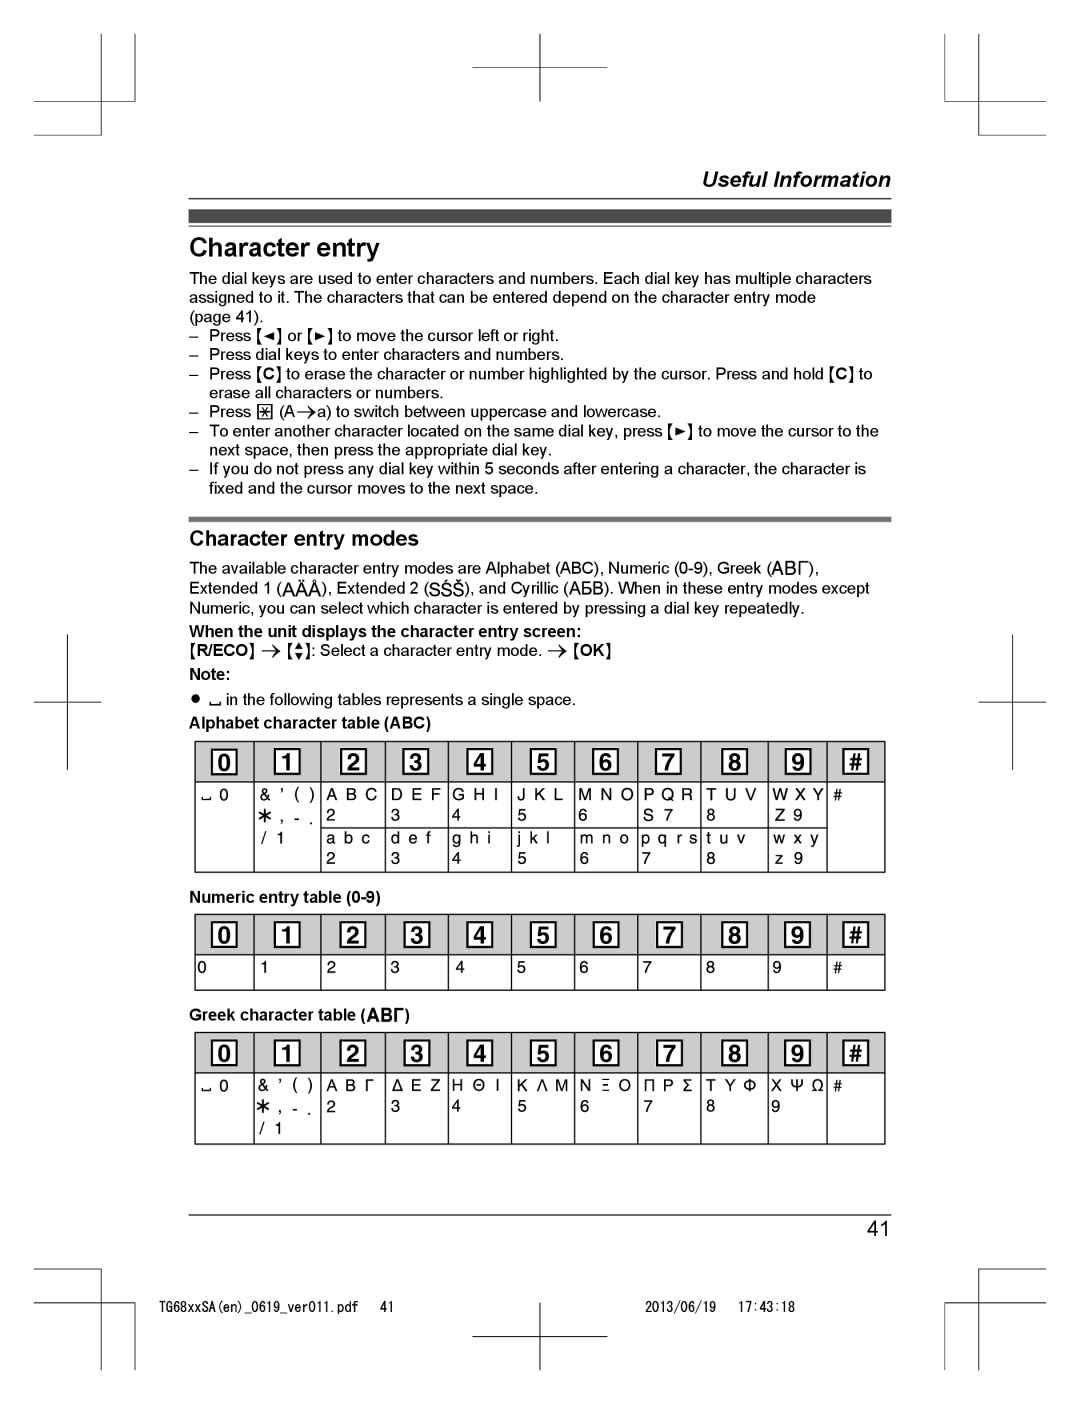 Panasonic KX-TG6821SA z 1 2 3 4 5 6 7 8 9 y, Useful Information, Character entry modes, Alphabet character table ABC 